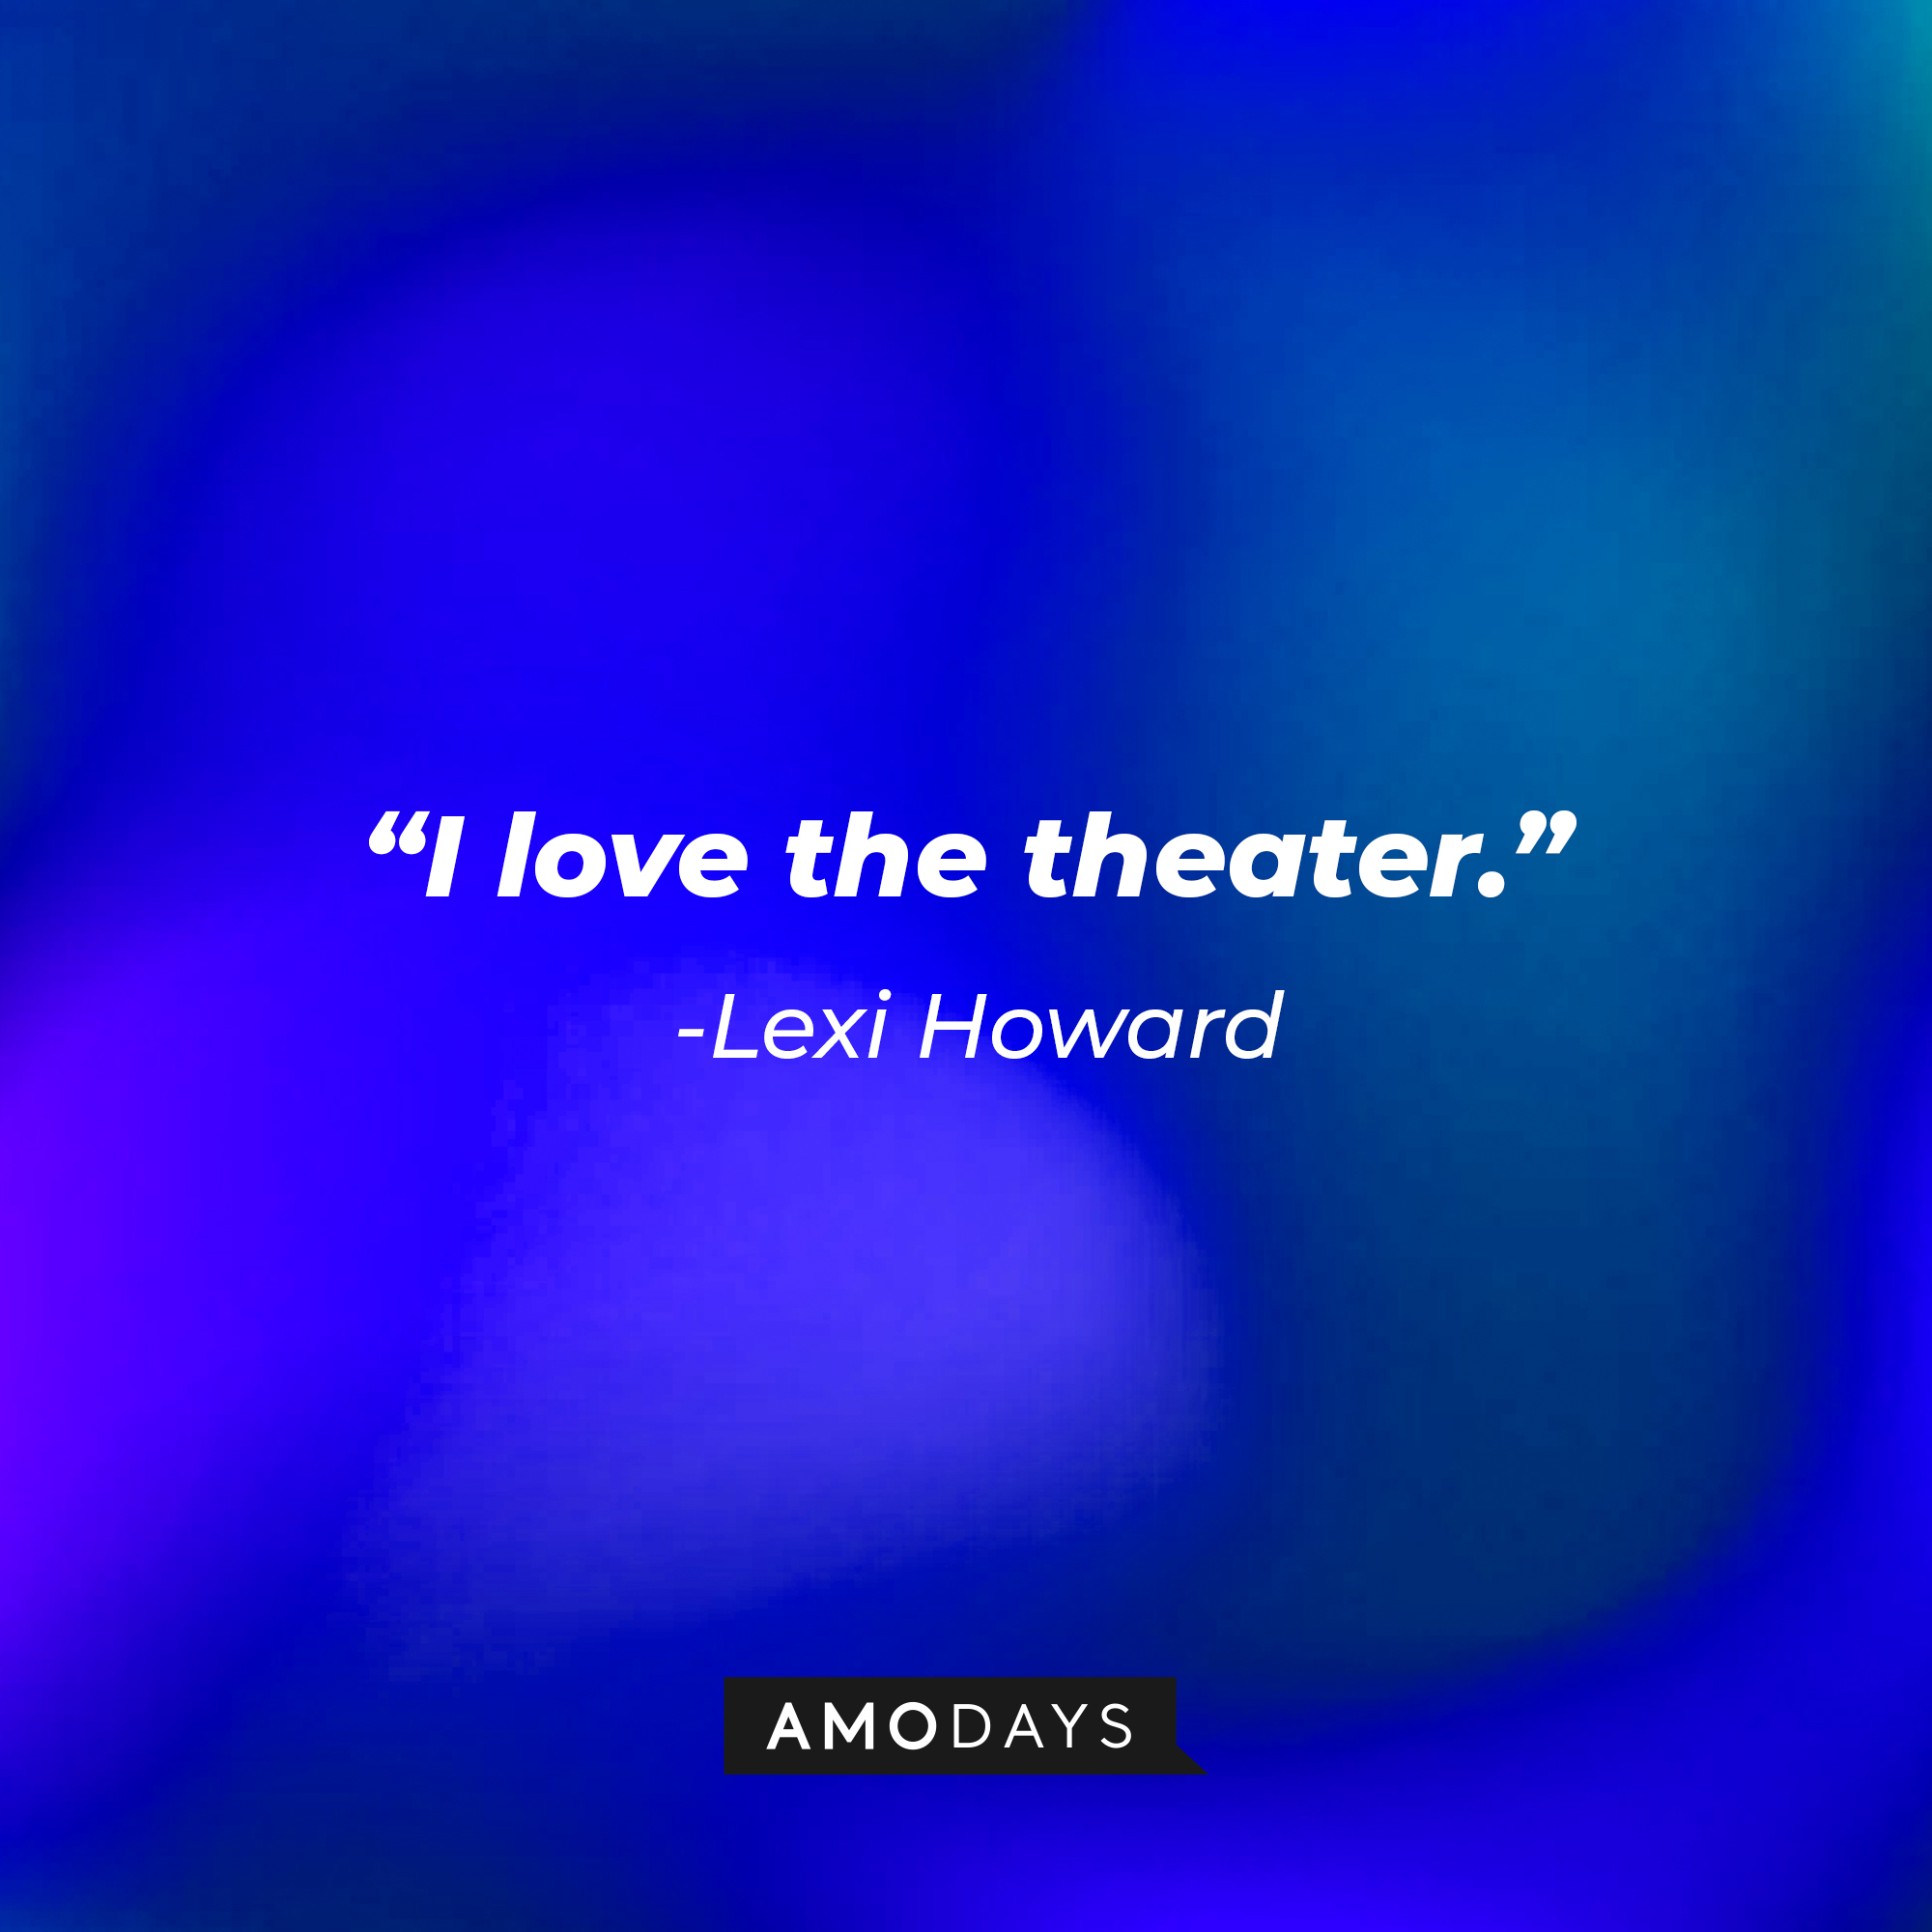 Lexi Howard’s quote: "I love the theater." | Source: AmoDays